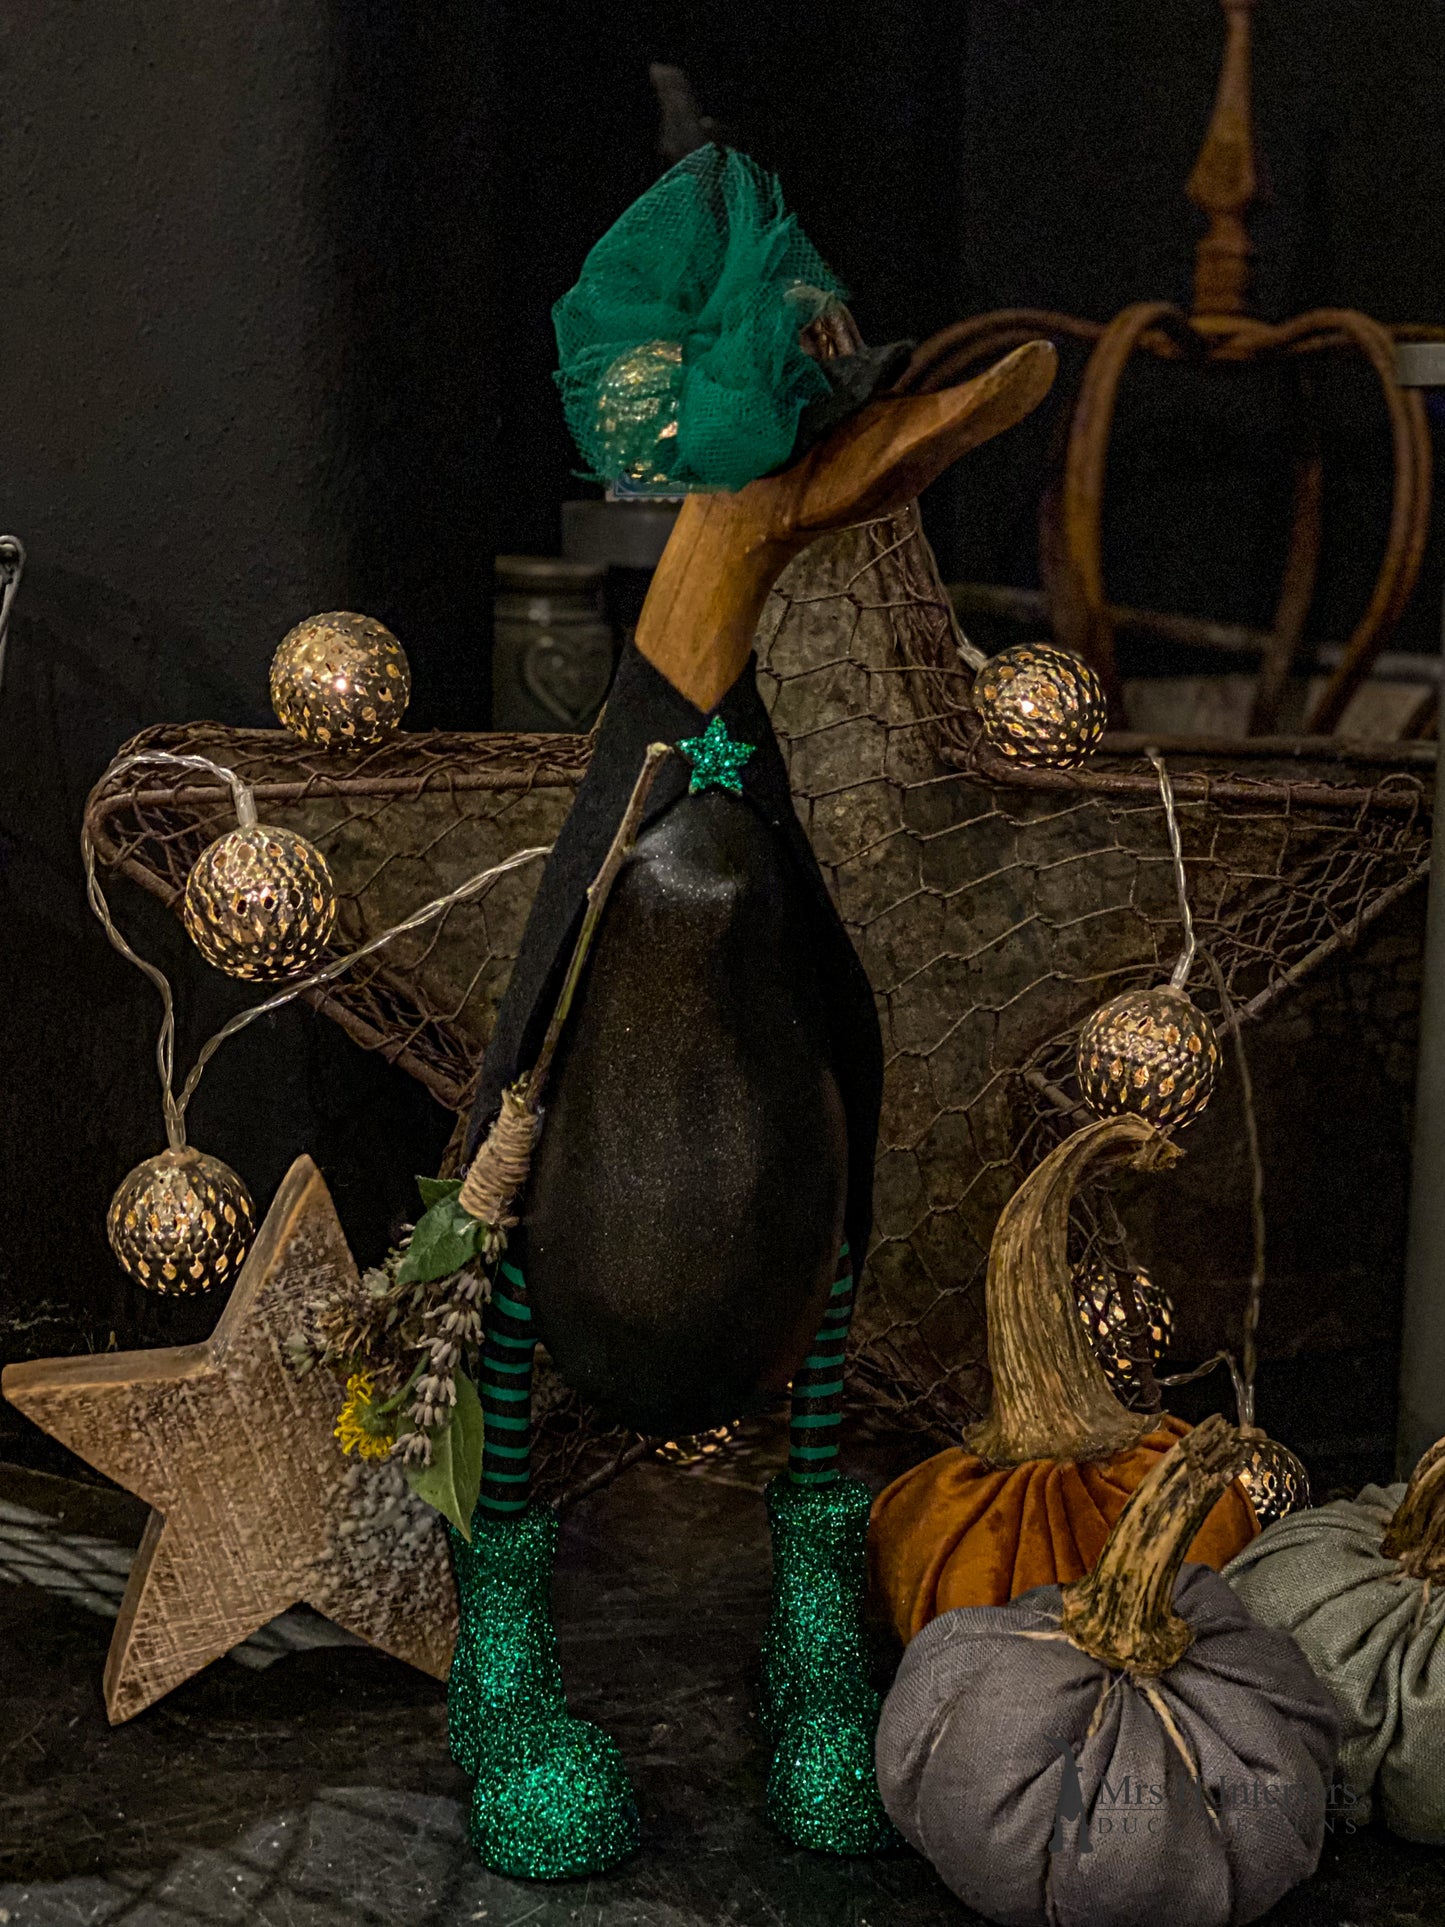 Jean The Witch Duck - Decorated Wooden Duck in Boots by Mrs H the Duck Lady